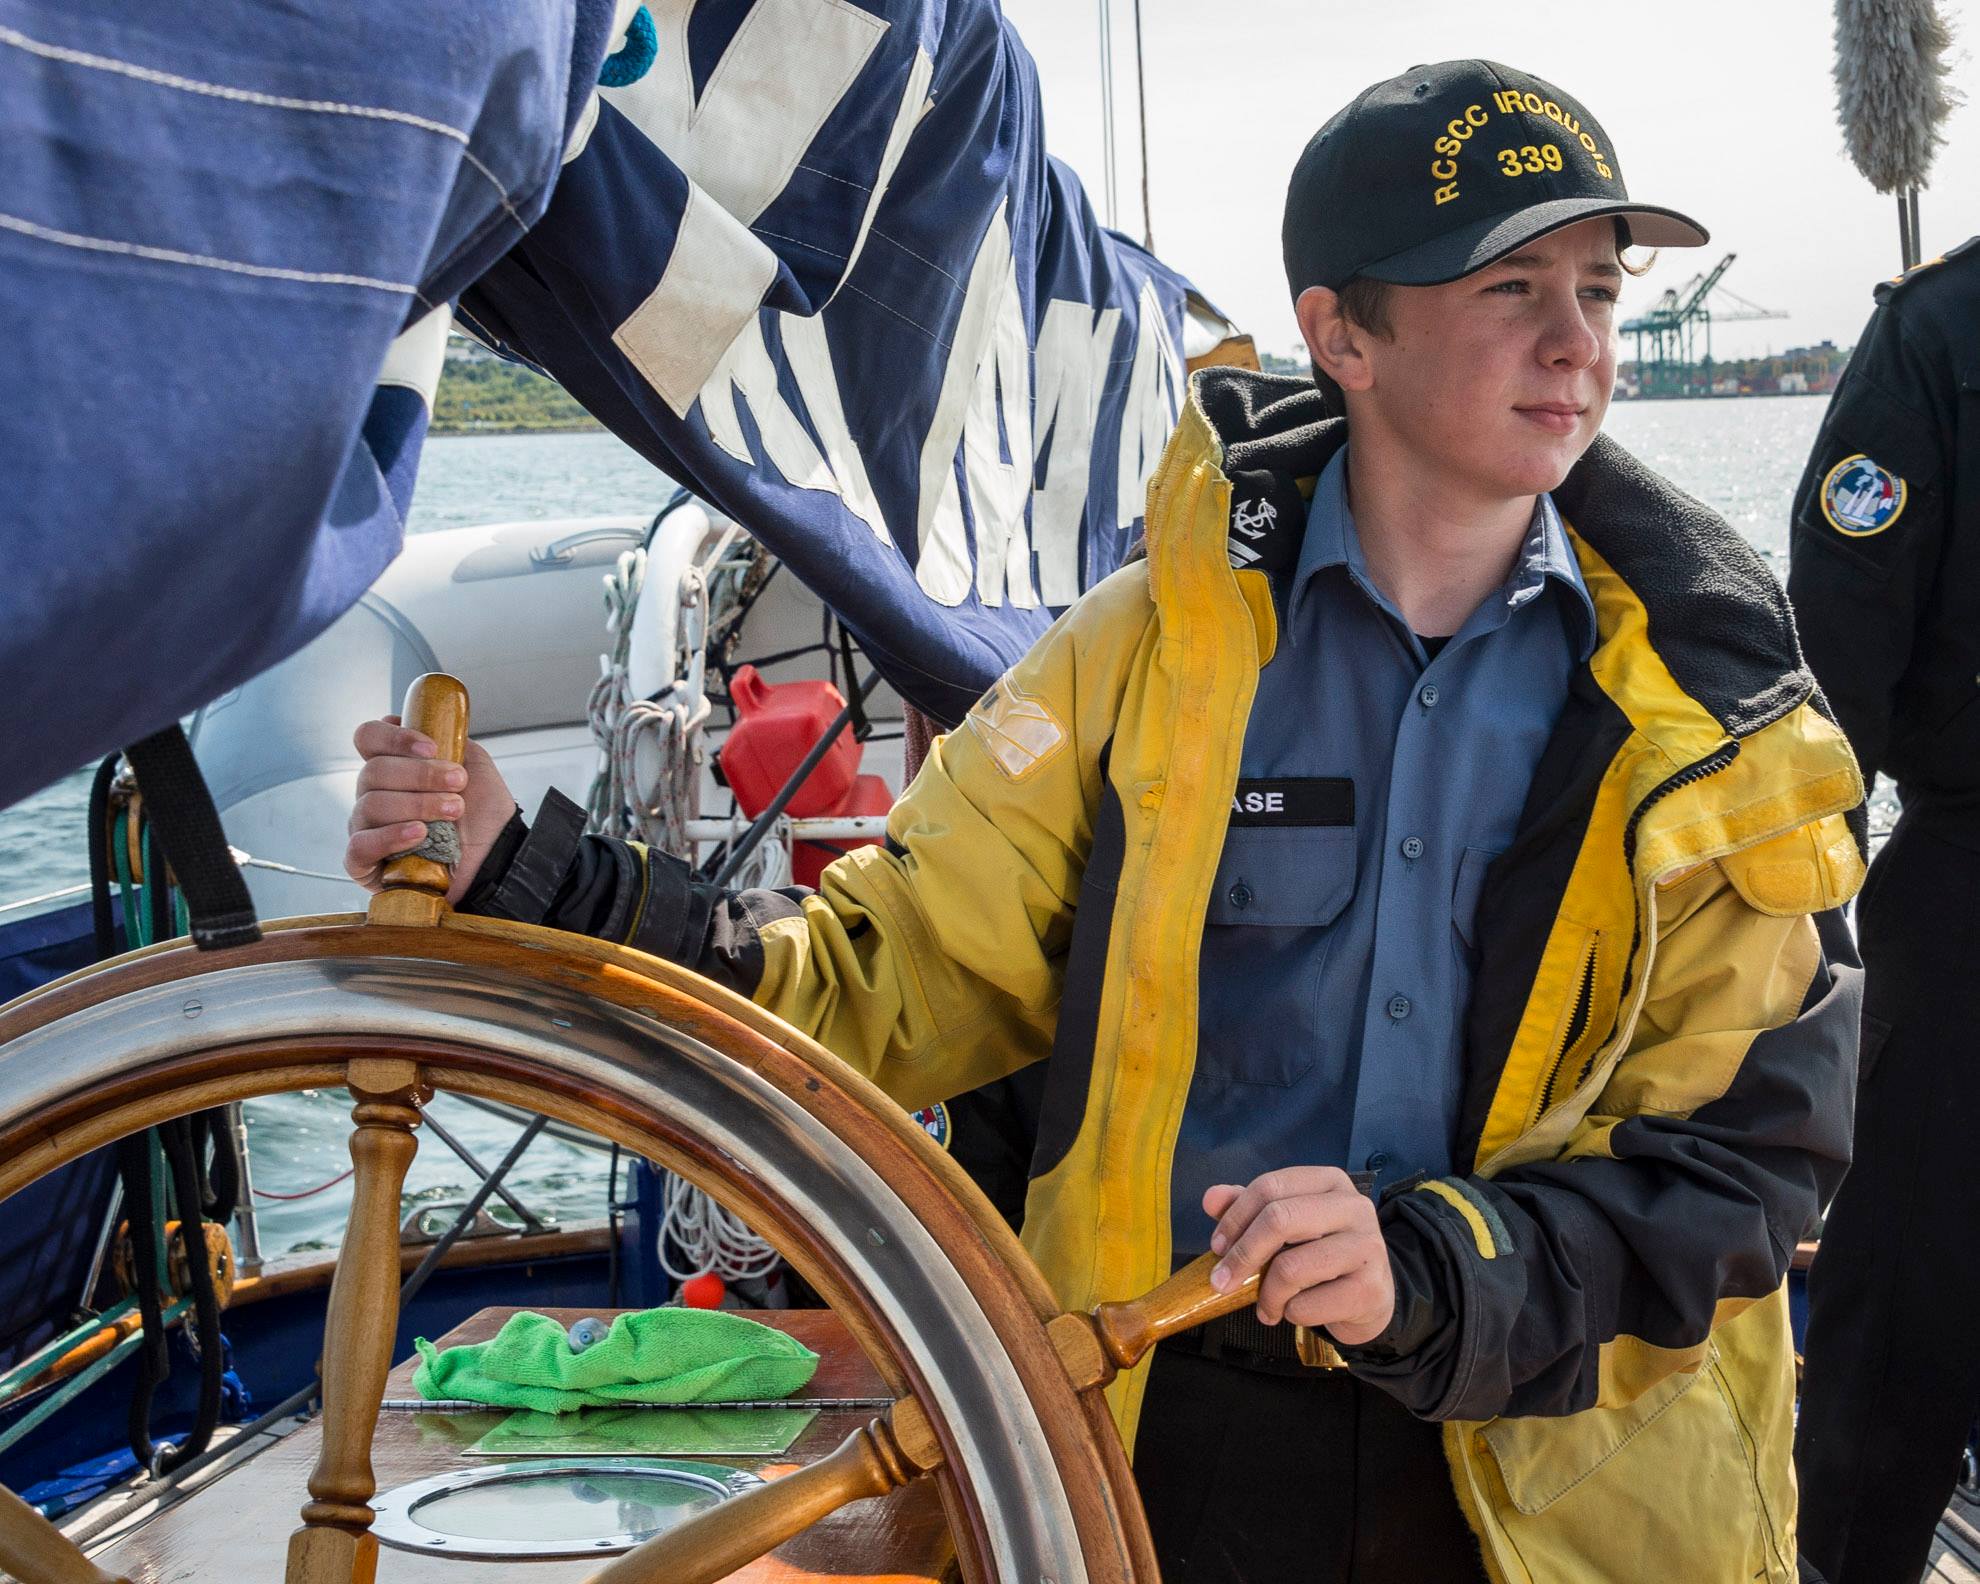 A sea cadet from Royal Canadian Sea Cadet Corps Iroquois, located in Shearwater, N.S., at the helm of HMCS Oriole, the Royal Canadian Navy’s sail training vessel.